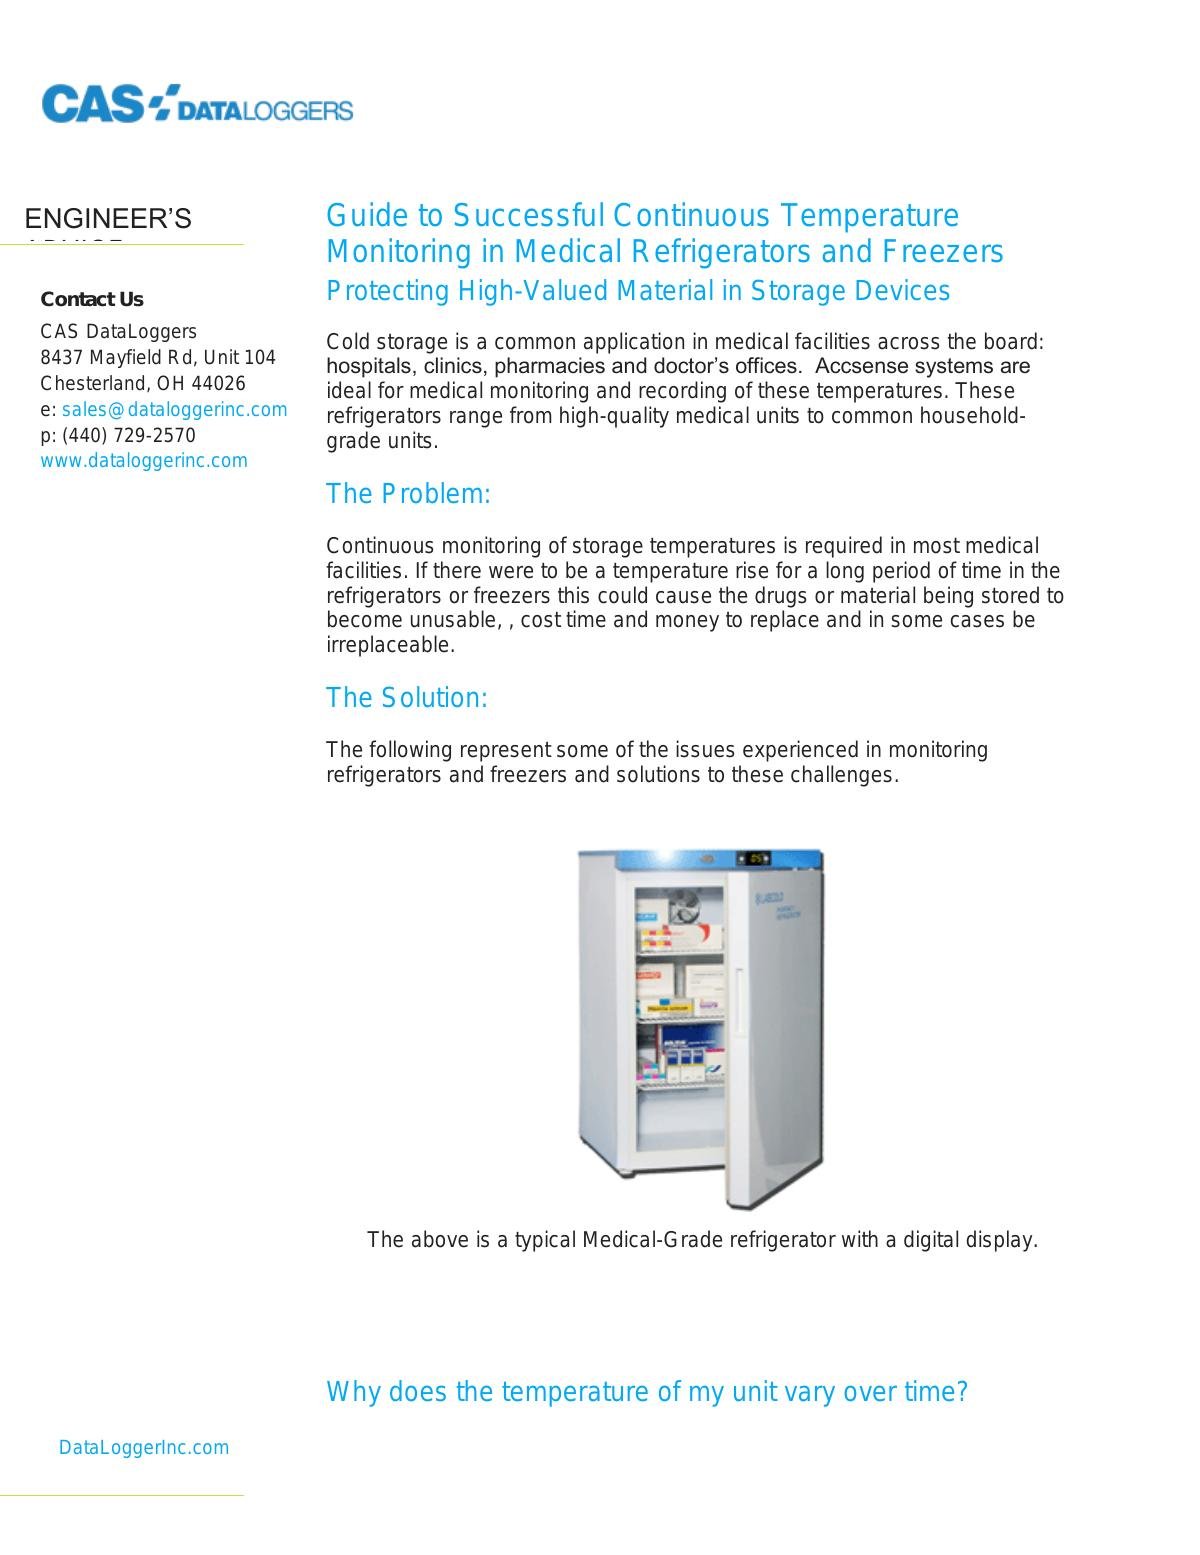 Guide to Successful Continuous Temperature Monitoring in Medical Refrigerators and Freezers 